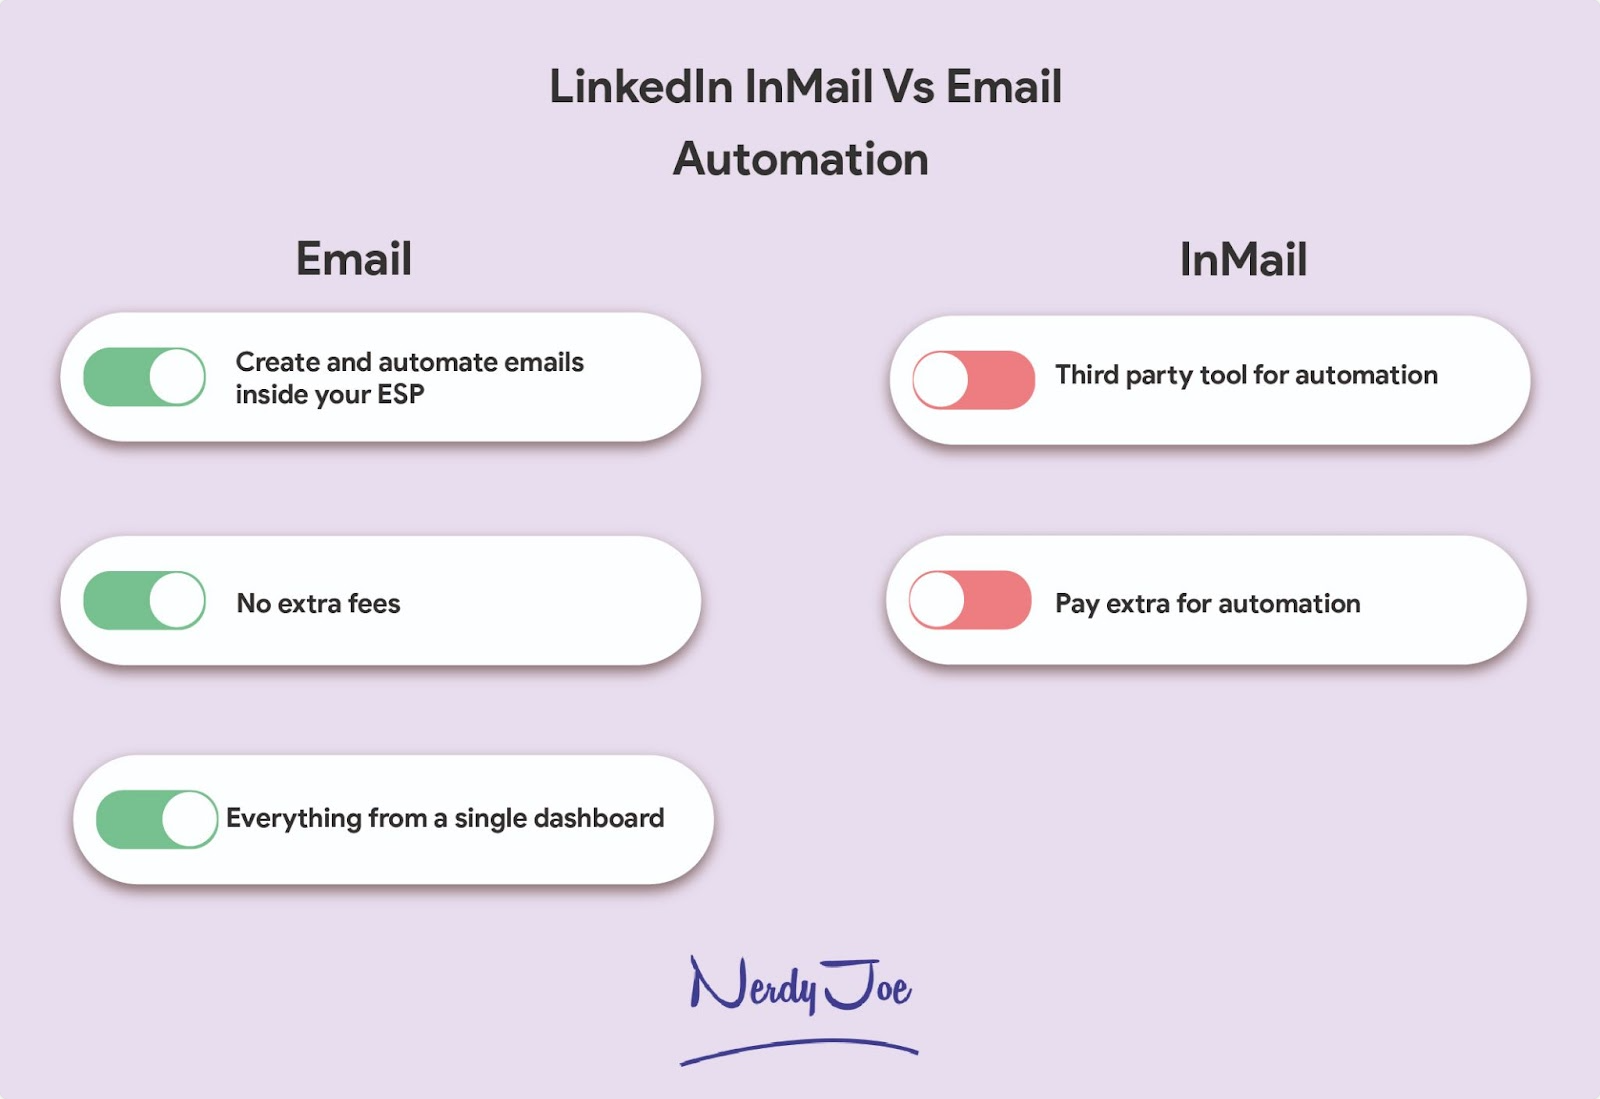 LinkedIn InMail vs Email: Automation